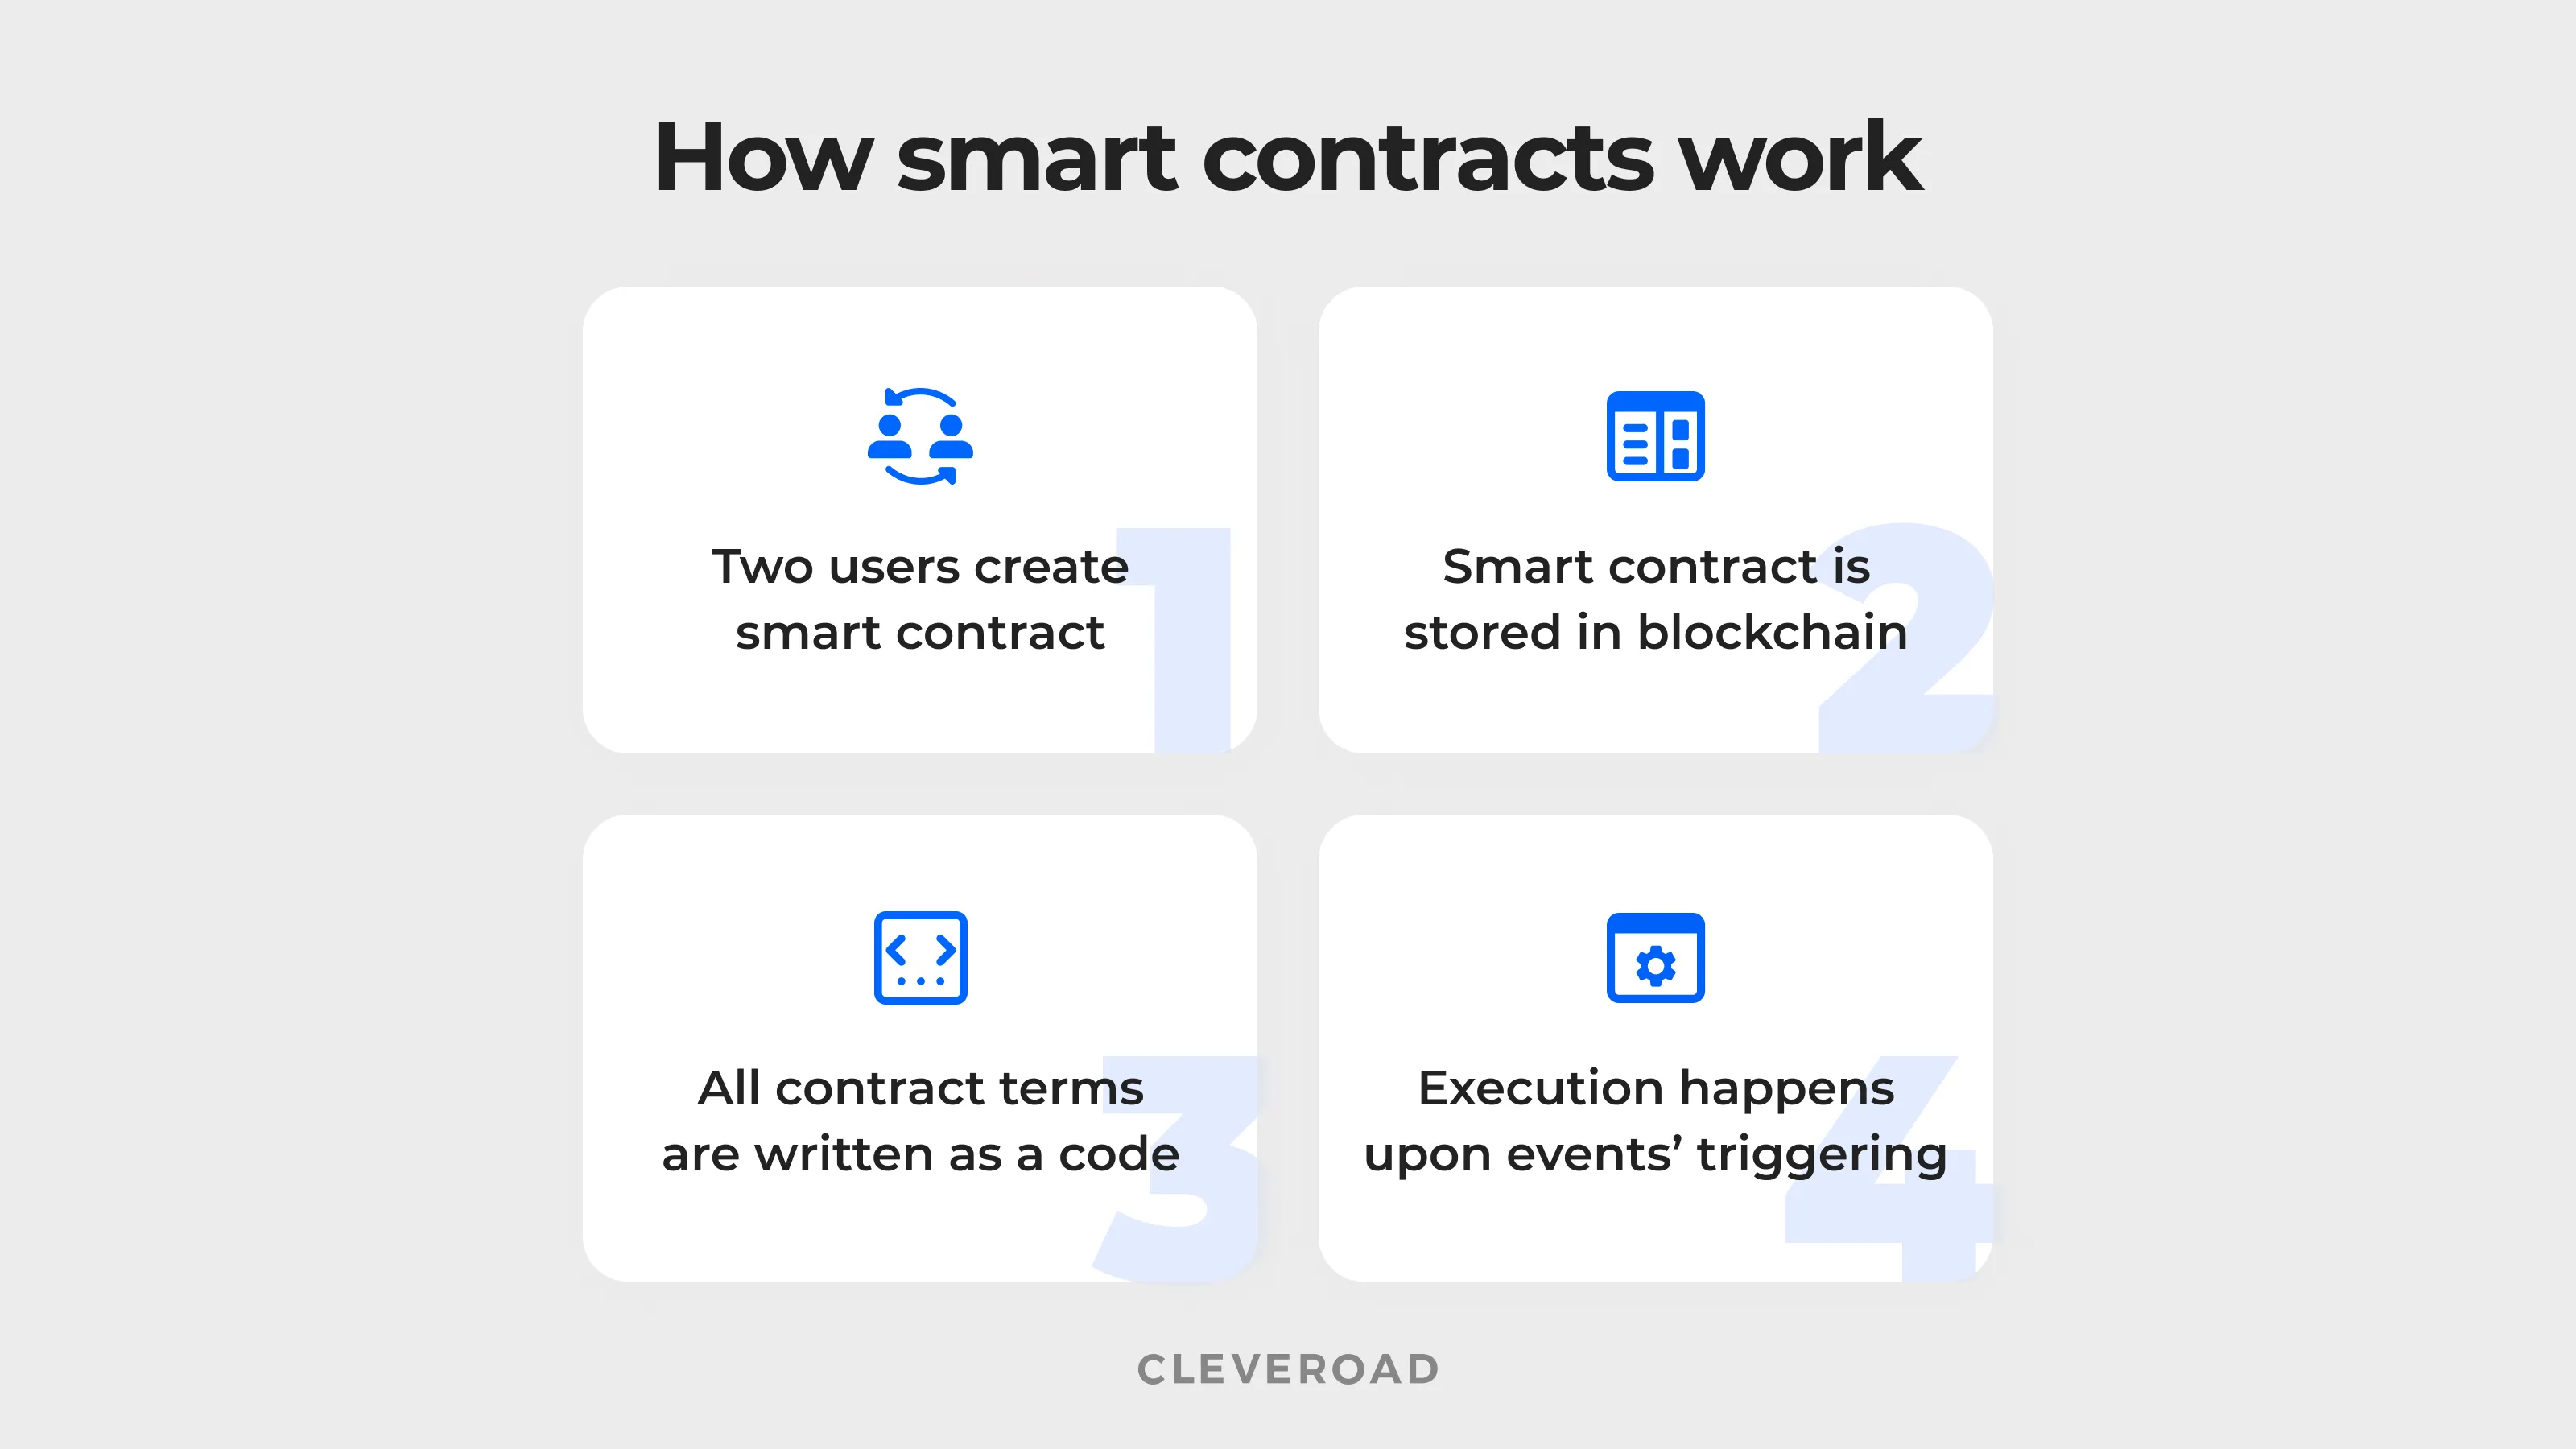 How do smart smart contracts work